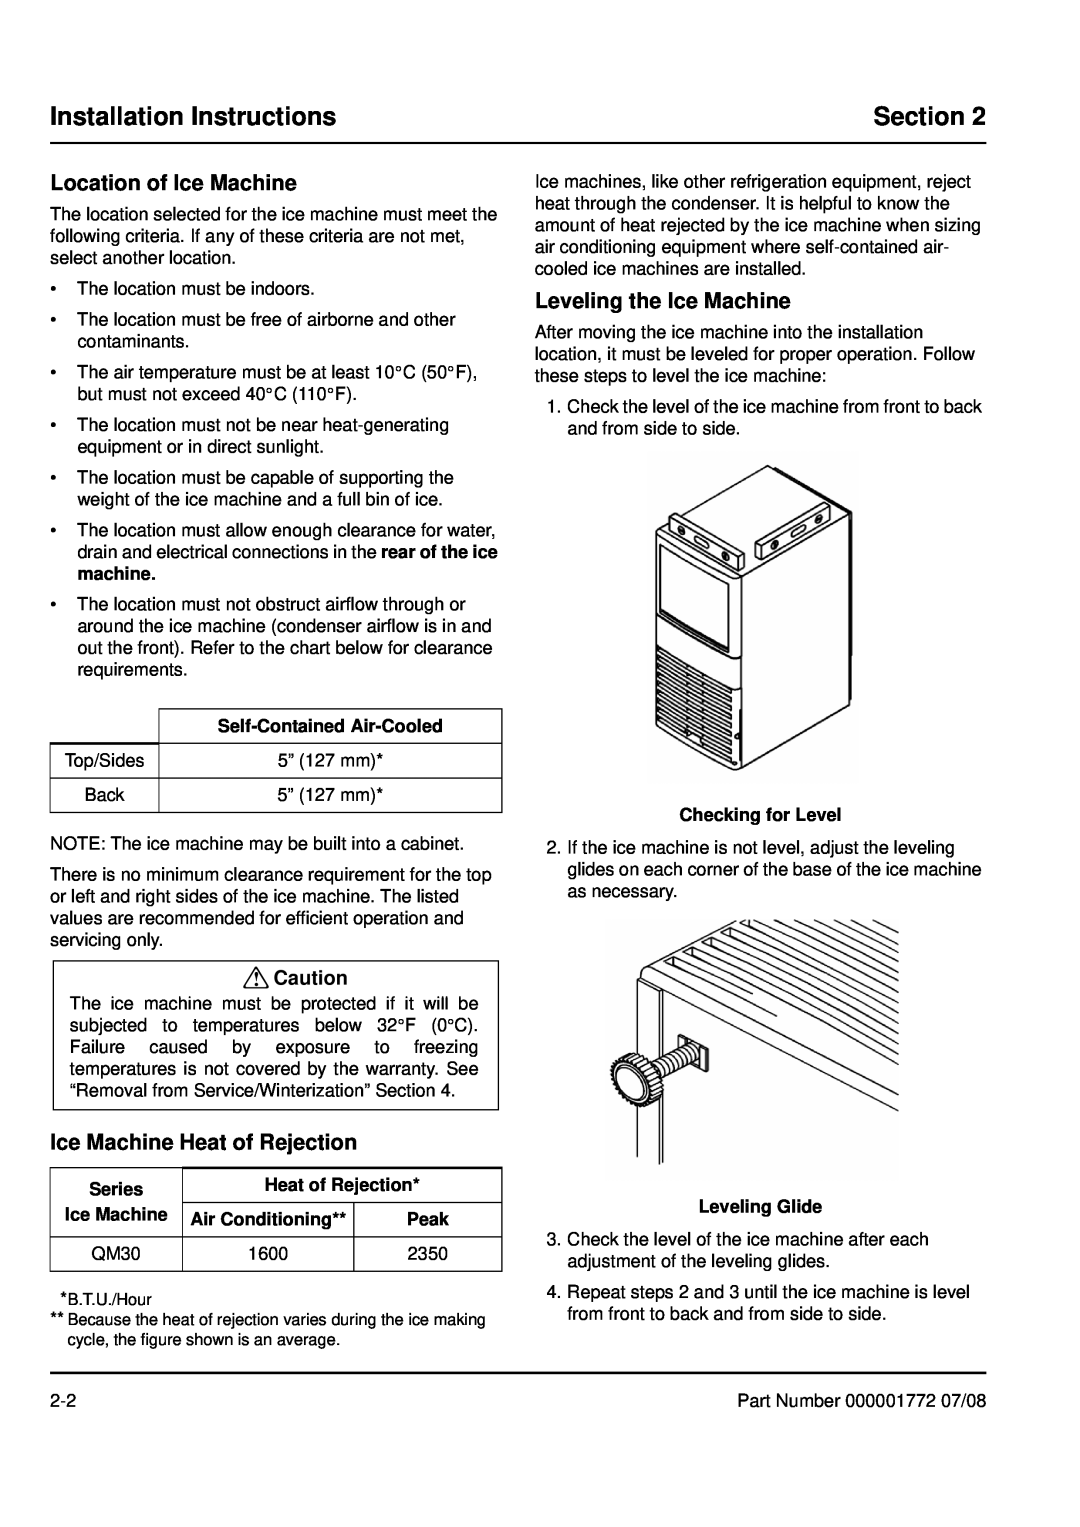 Manitowoc Ice QM30 Installation Instructions, Section, Self-Contained Air-Cooled, Series, Heat of Rejection, Ice Machine 